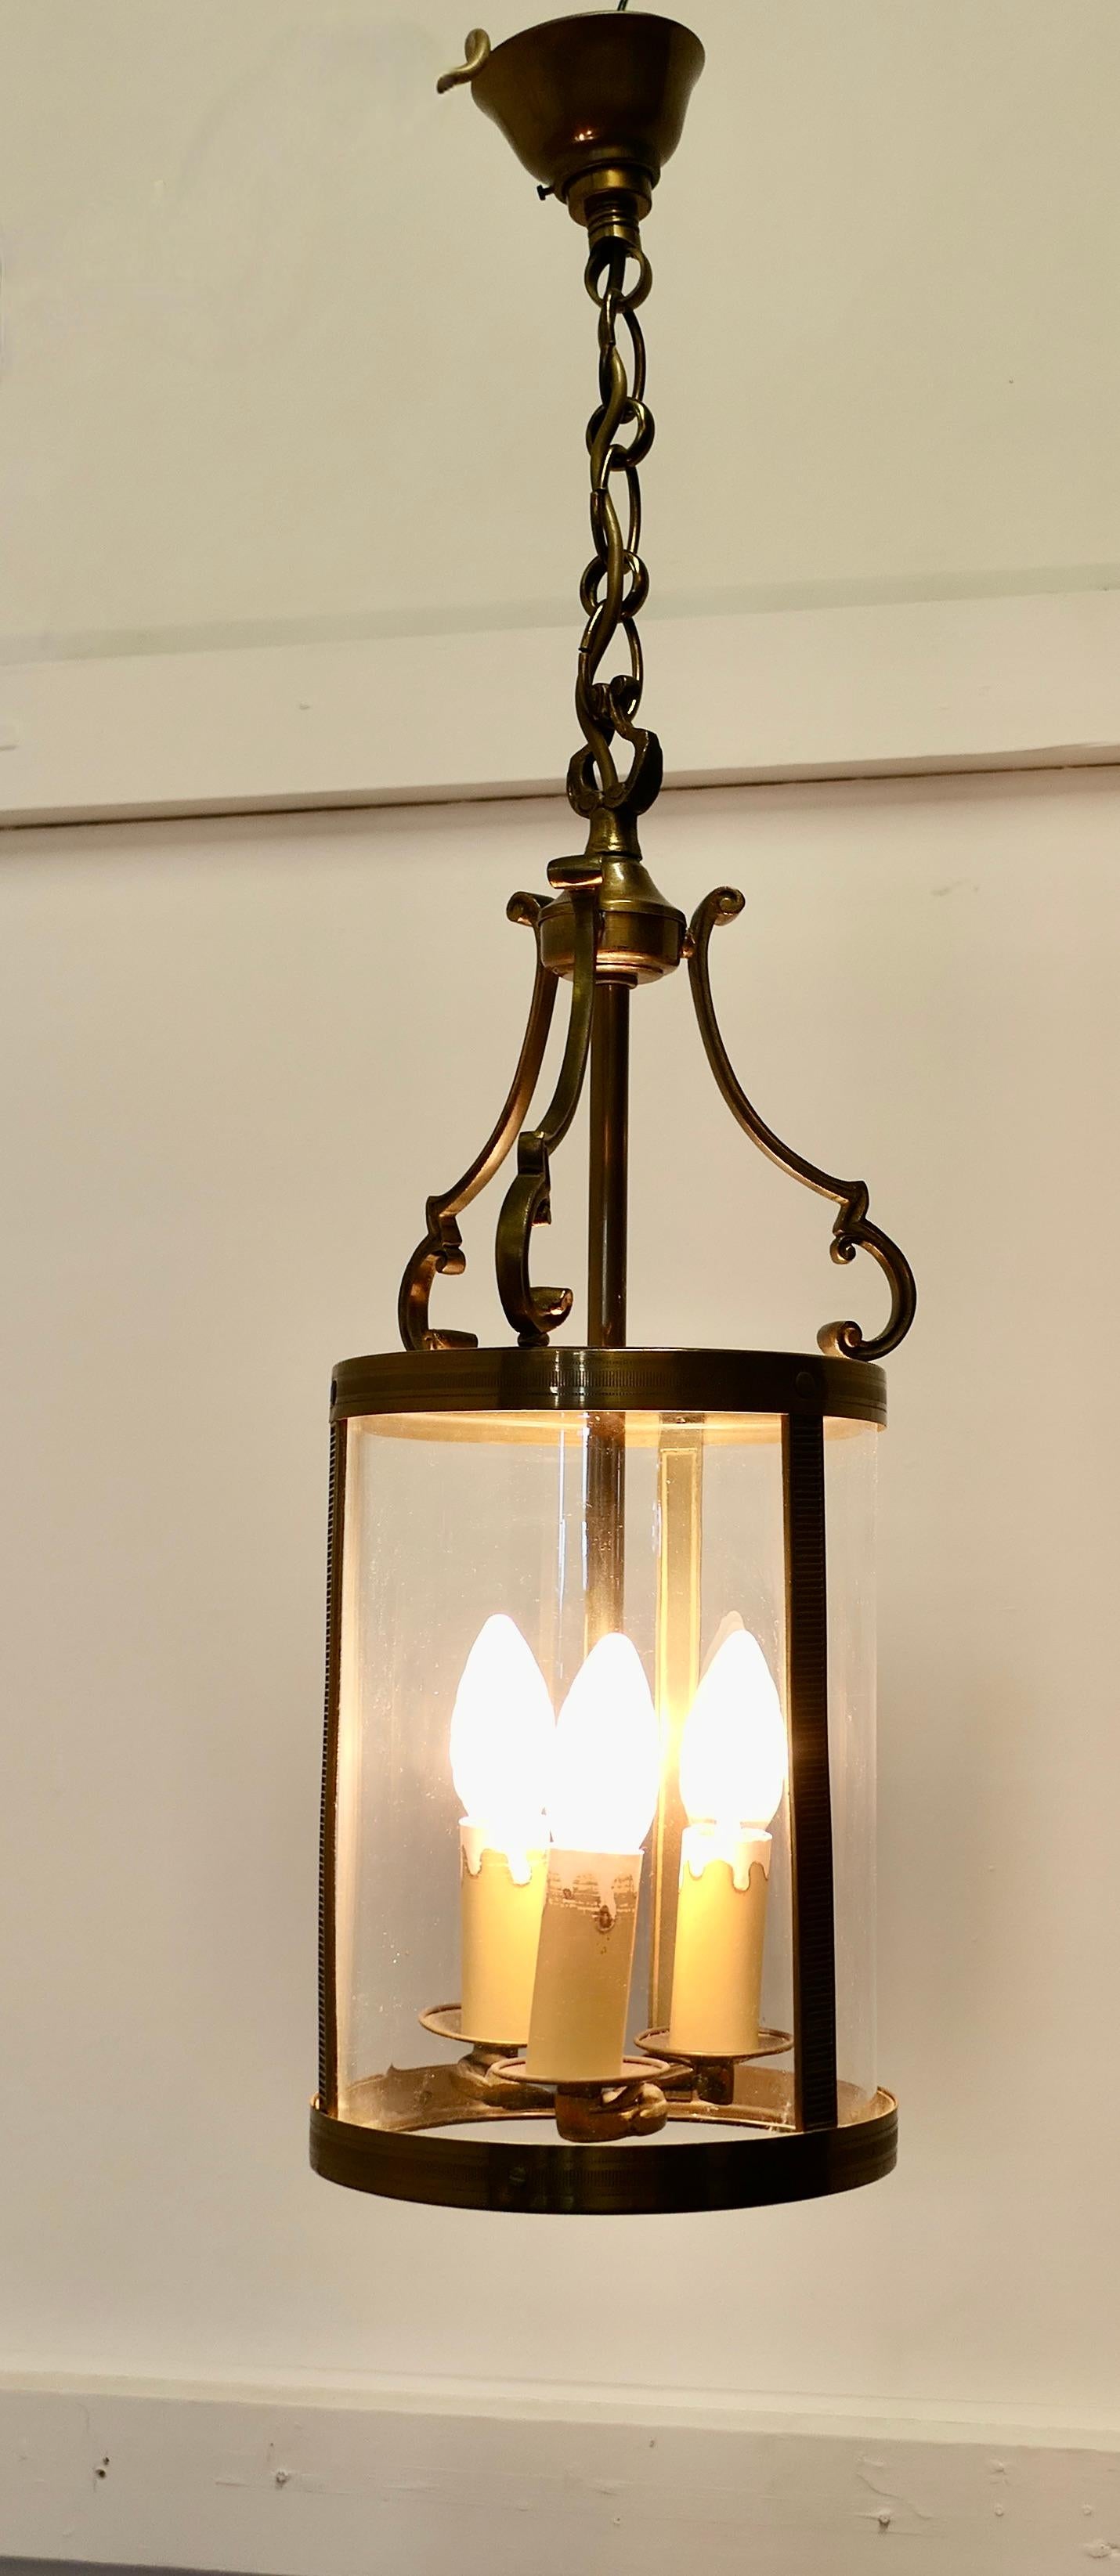 French Art Deco Brass Glass Lantern Hall Light

A superb quality brass lantern, the light is circular and it hangs on a chain and has brass ceiling rose
The lantern gives a bright light when lit with the 3 bulbs
The lamp is in good working